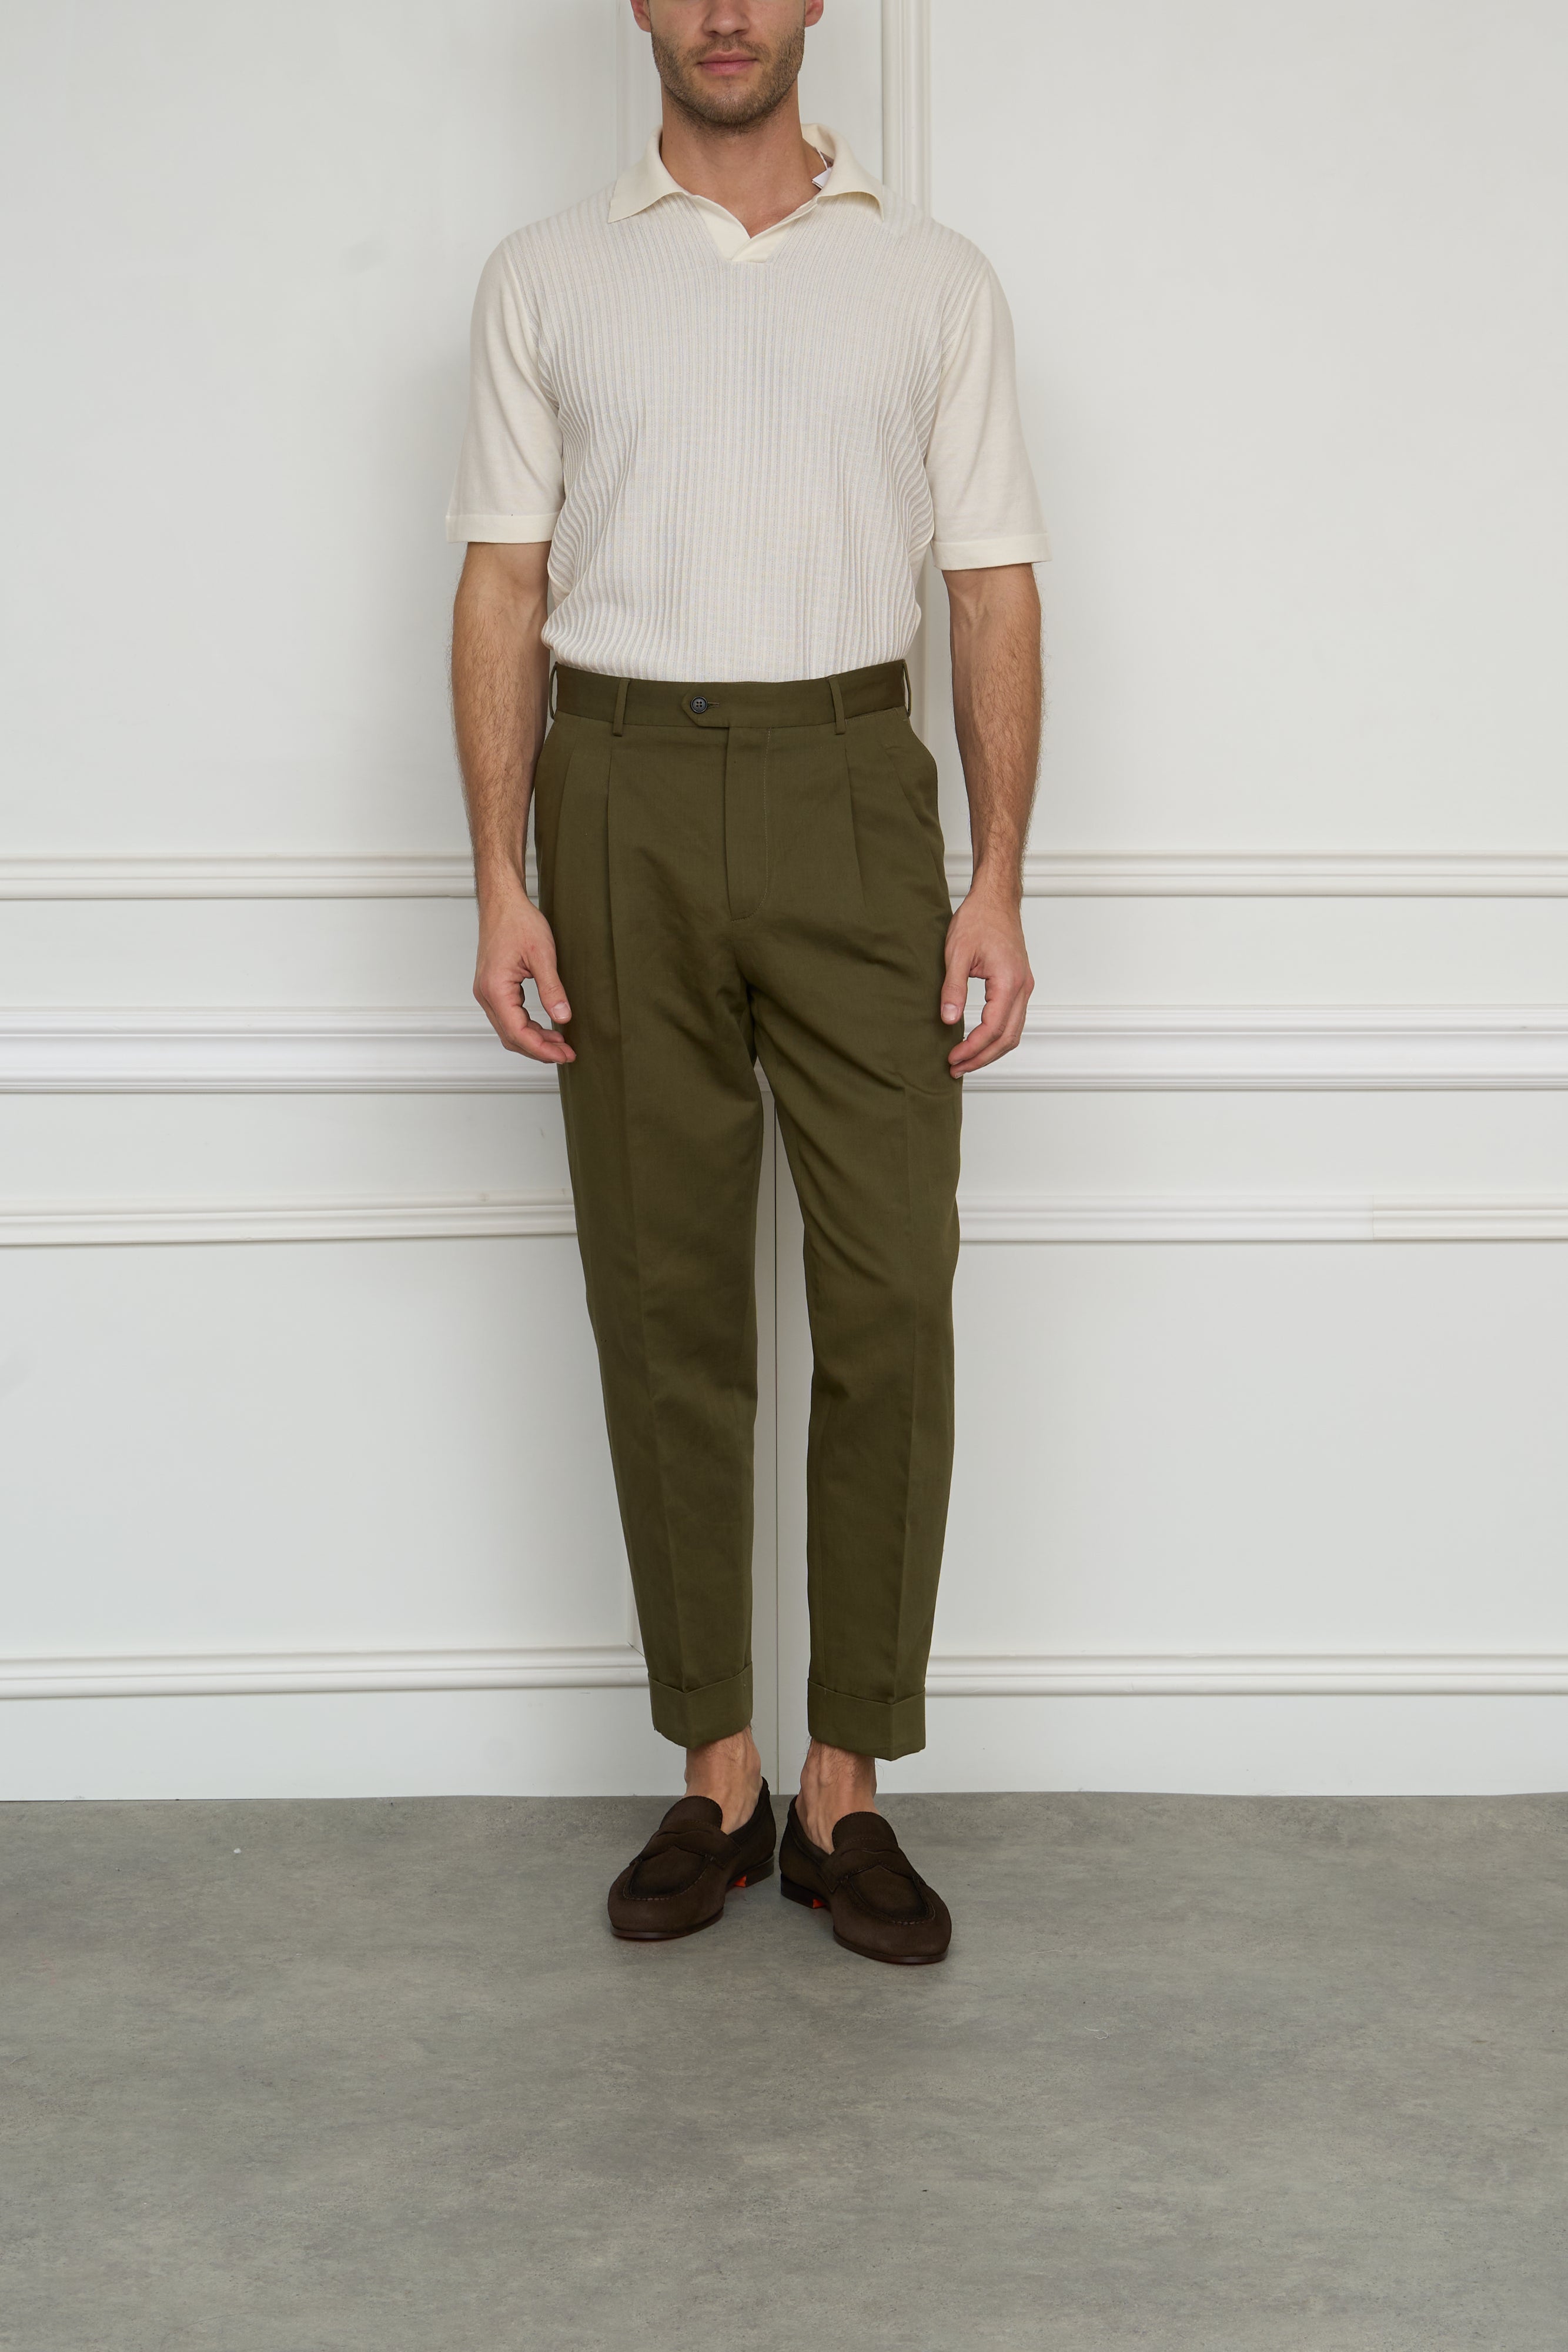 Chino in olive